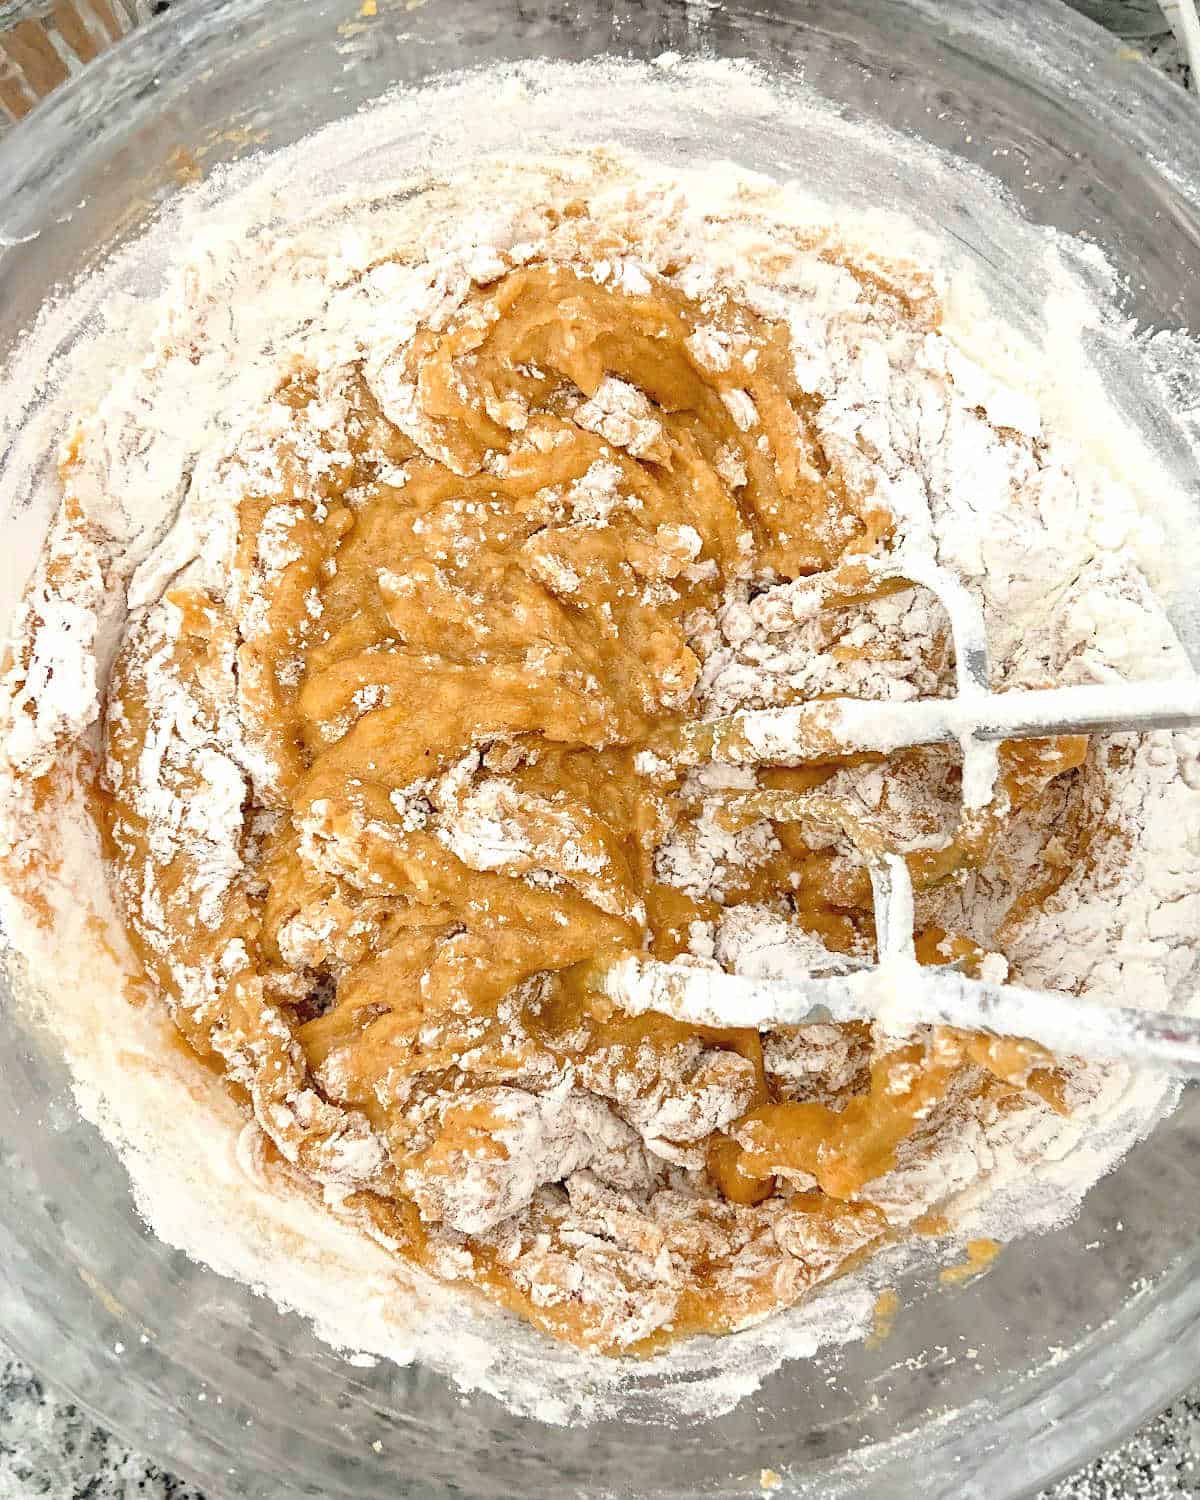 Flour added to pumpkin bread batter in a glass bowl with metal beaters inside.